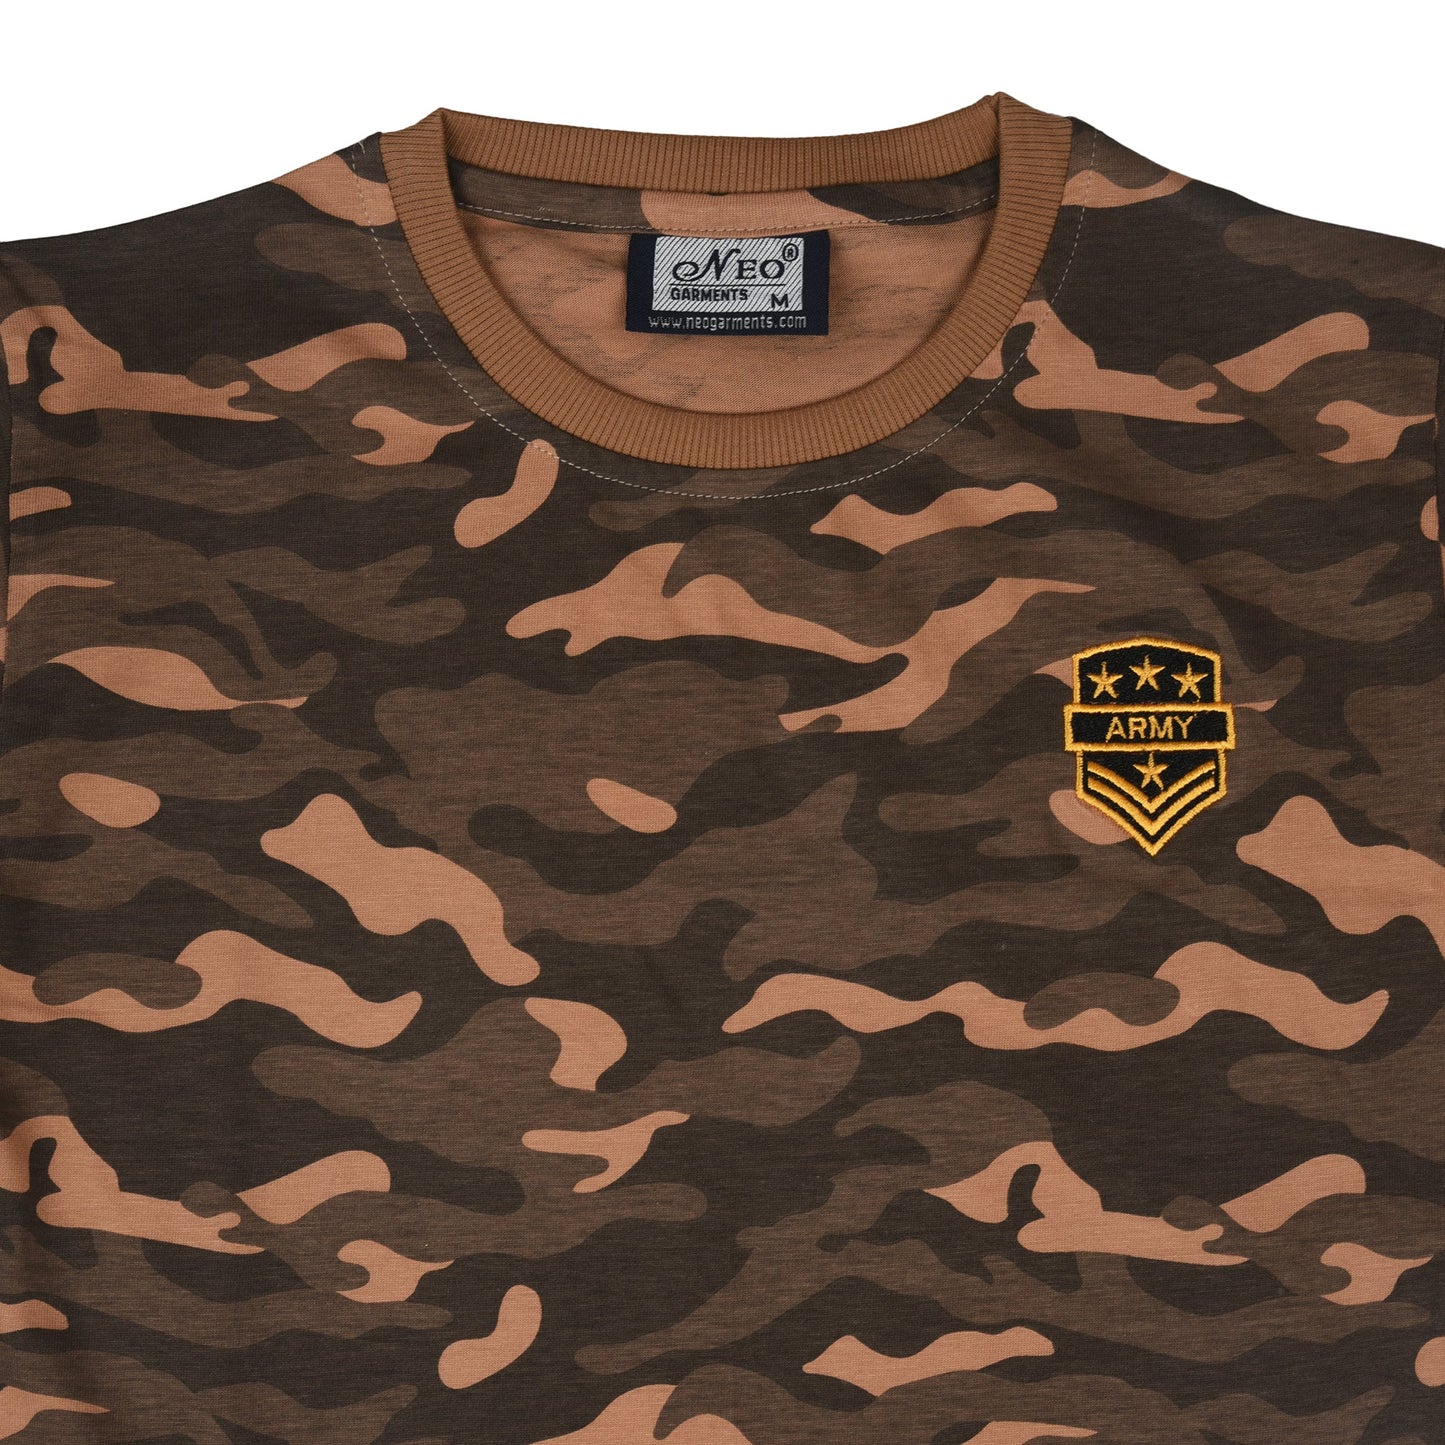 NEO GARMENTS Kids Unisex Round Neck Printed Cotton T-shirt - CAMOUFLAGE. | SIZE FROM 1 YRS TO 7 YRS.